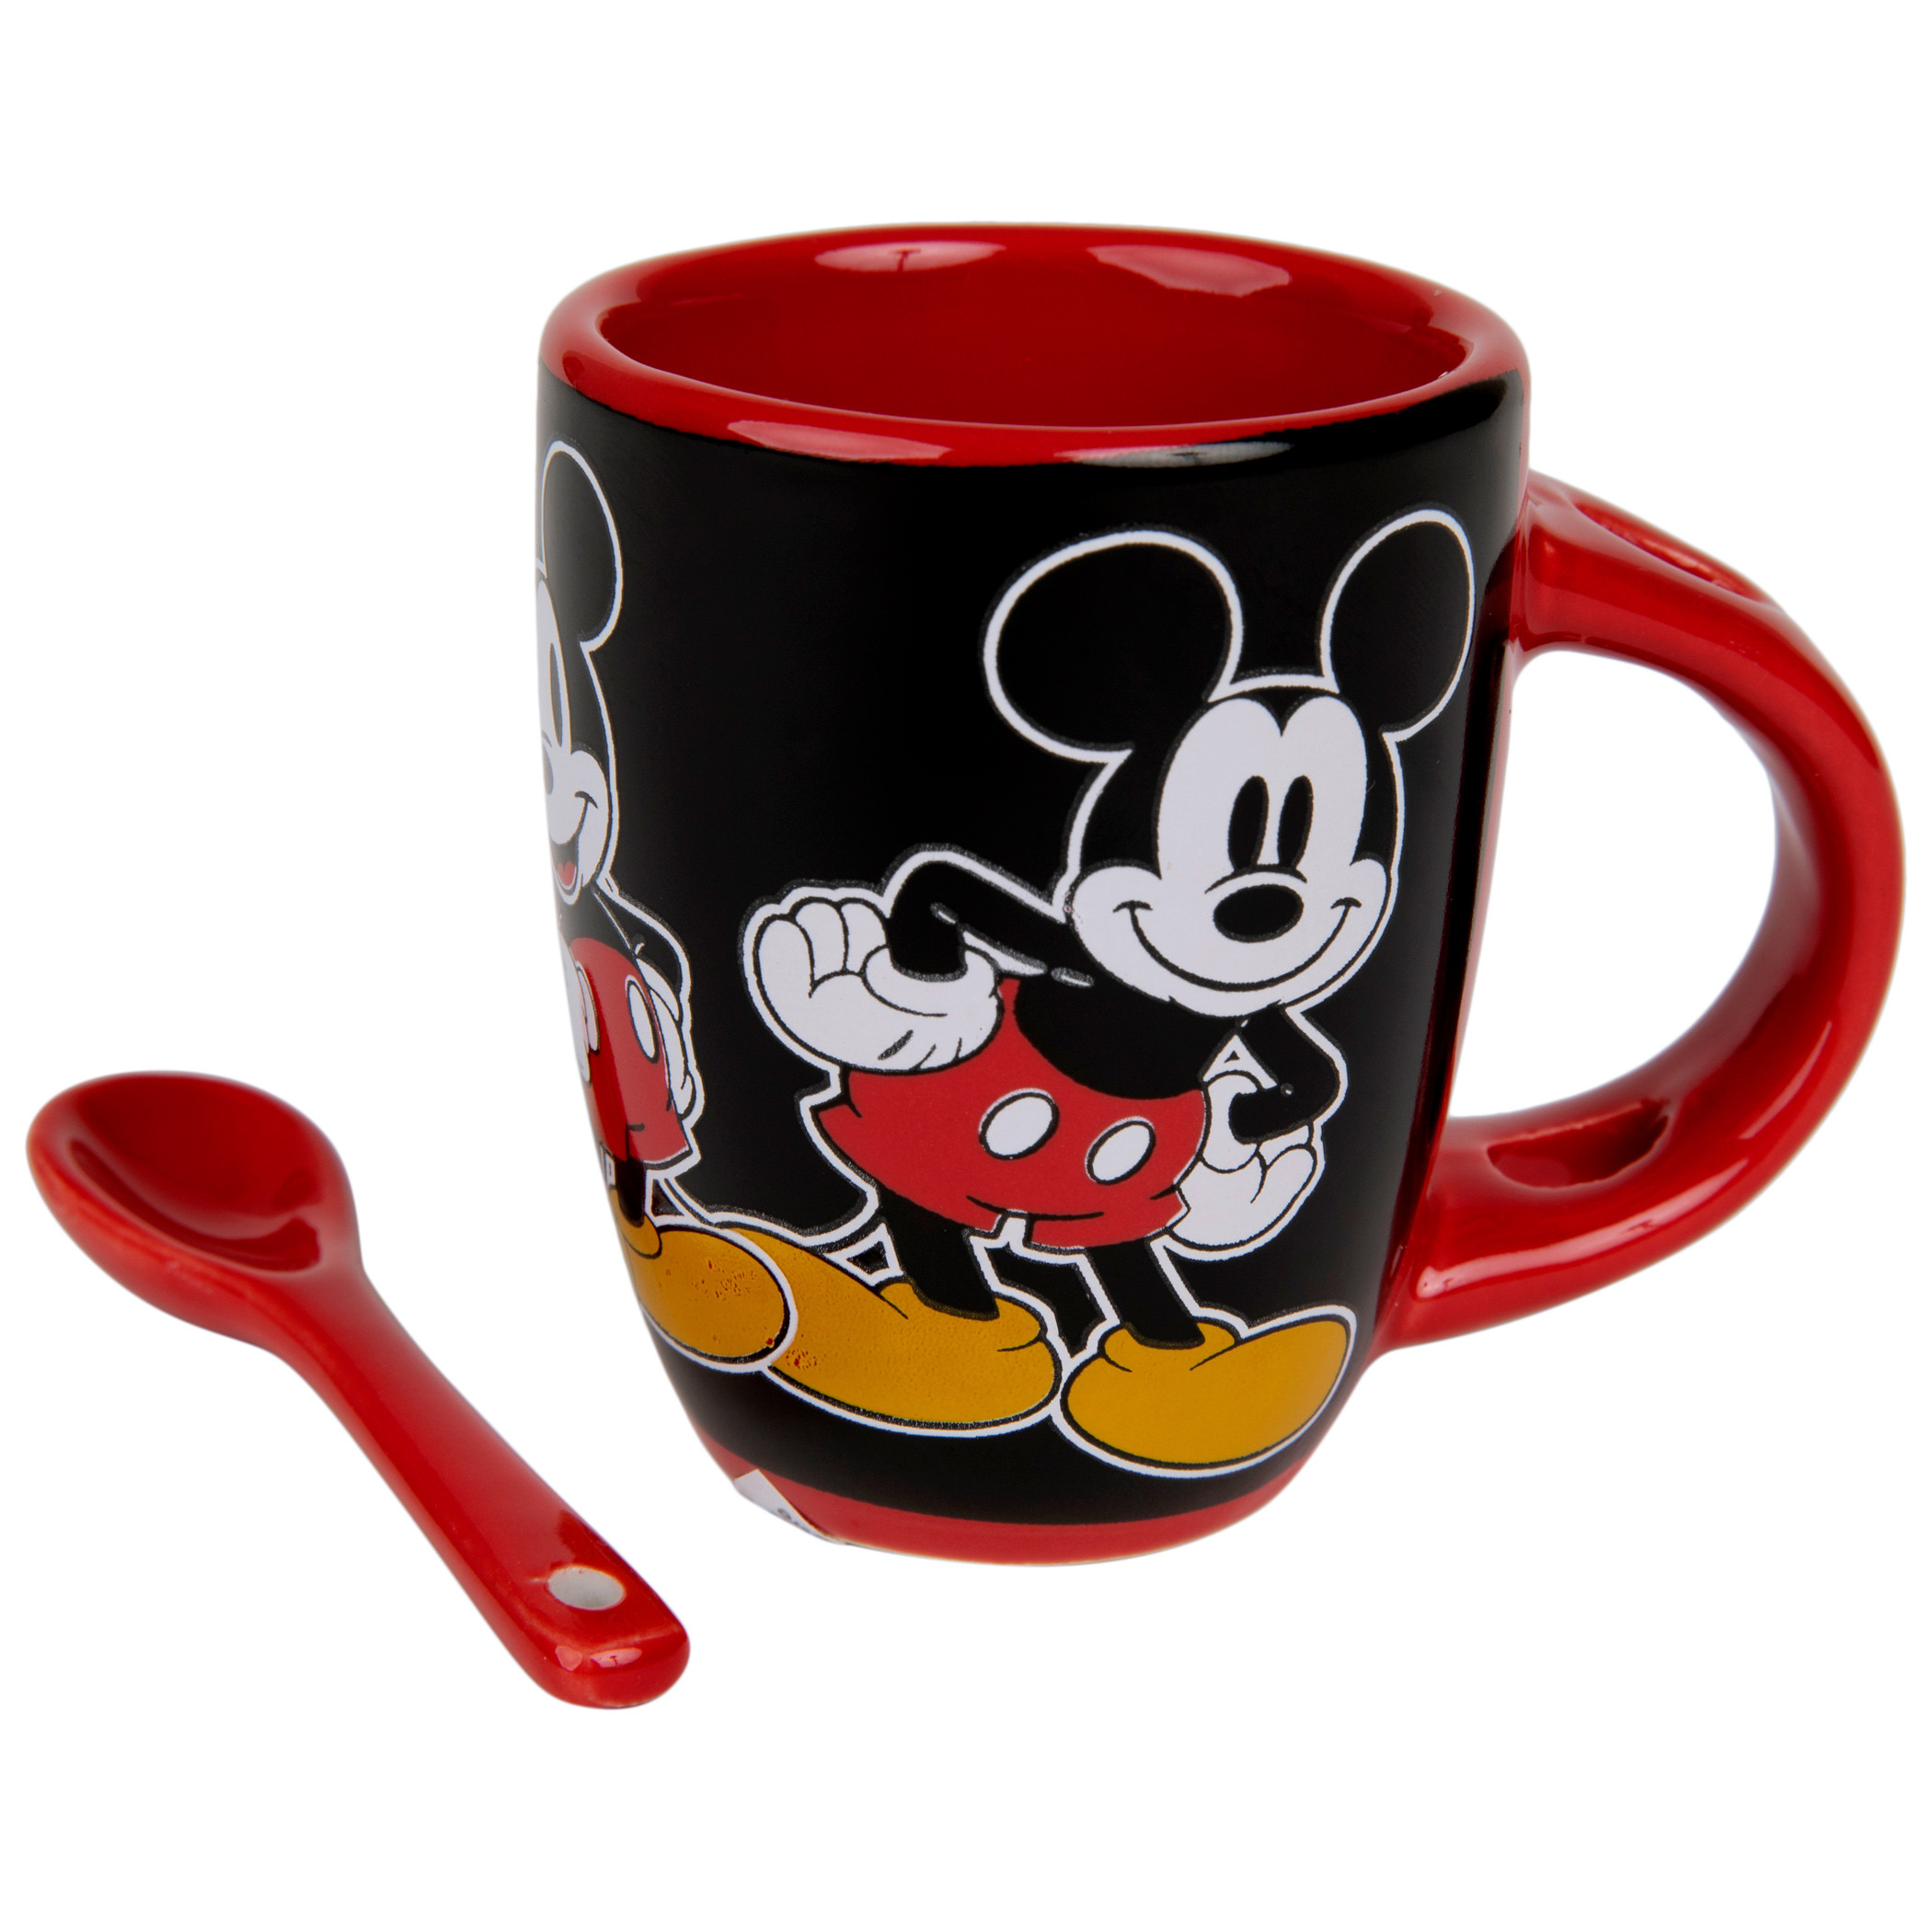 Disney Mickey Mouse Laughing Ceramic Espresso Mug with Spoon